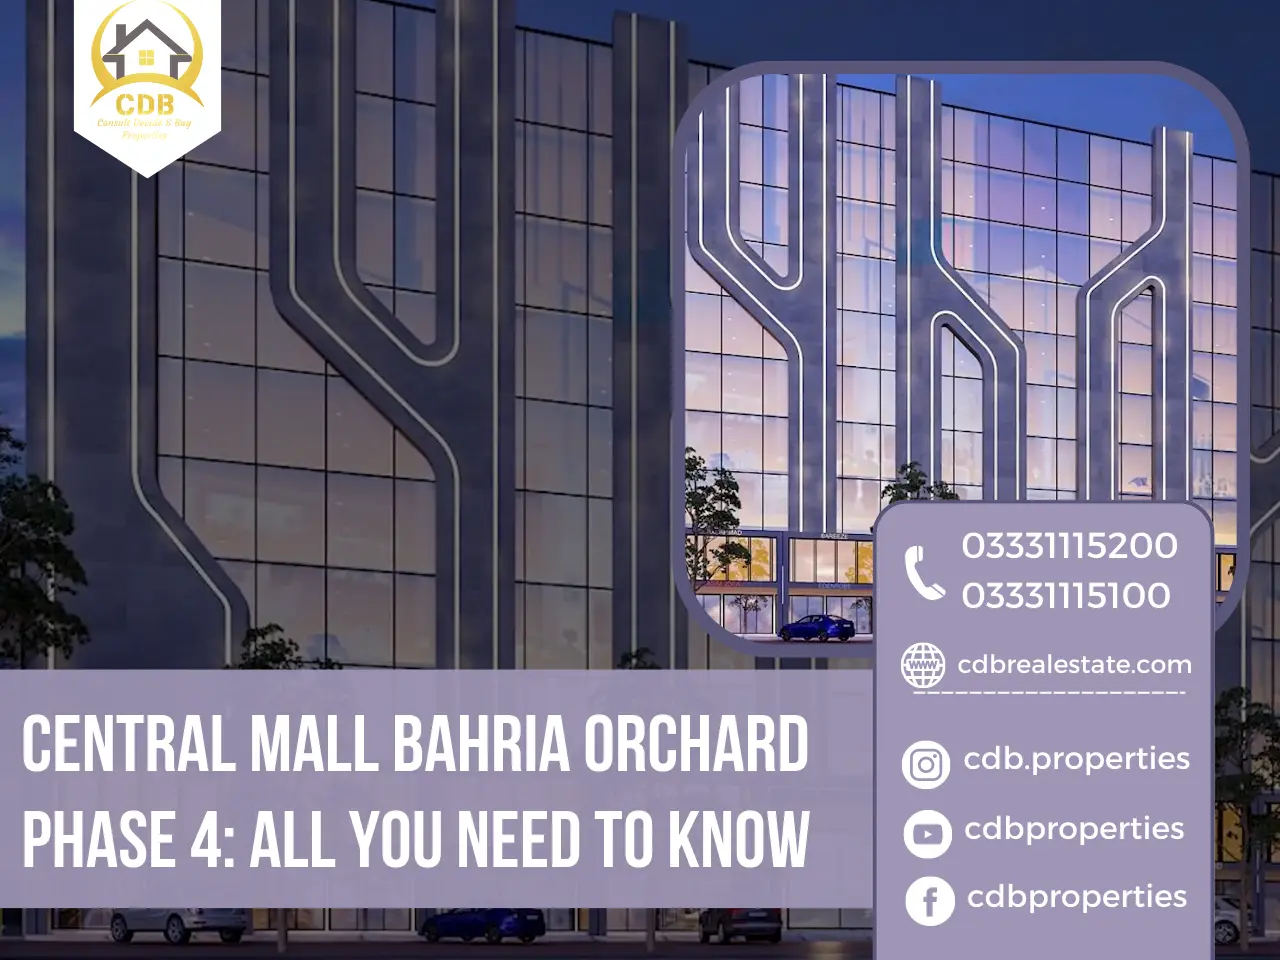 Central Mall in Bahria Orchard Phase 4 All You Need To Know